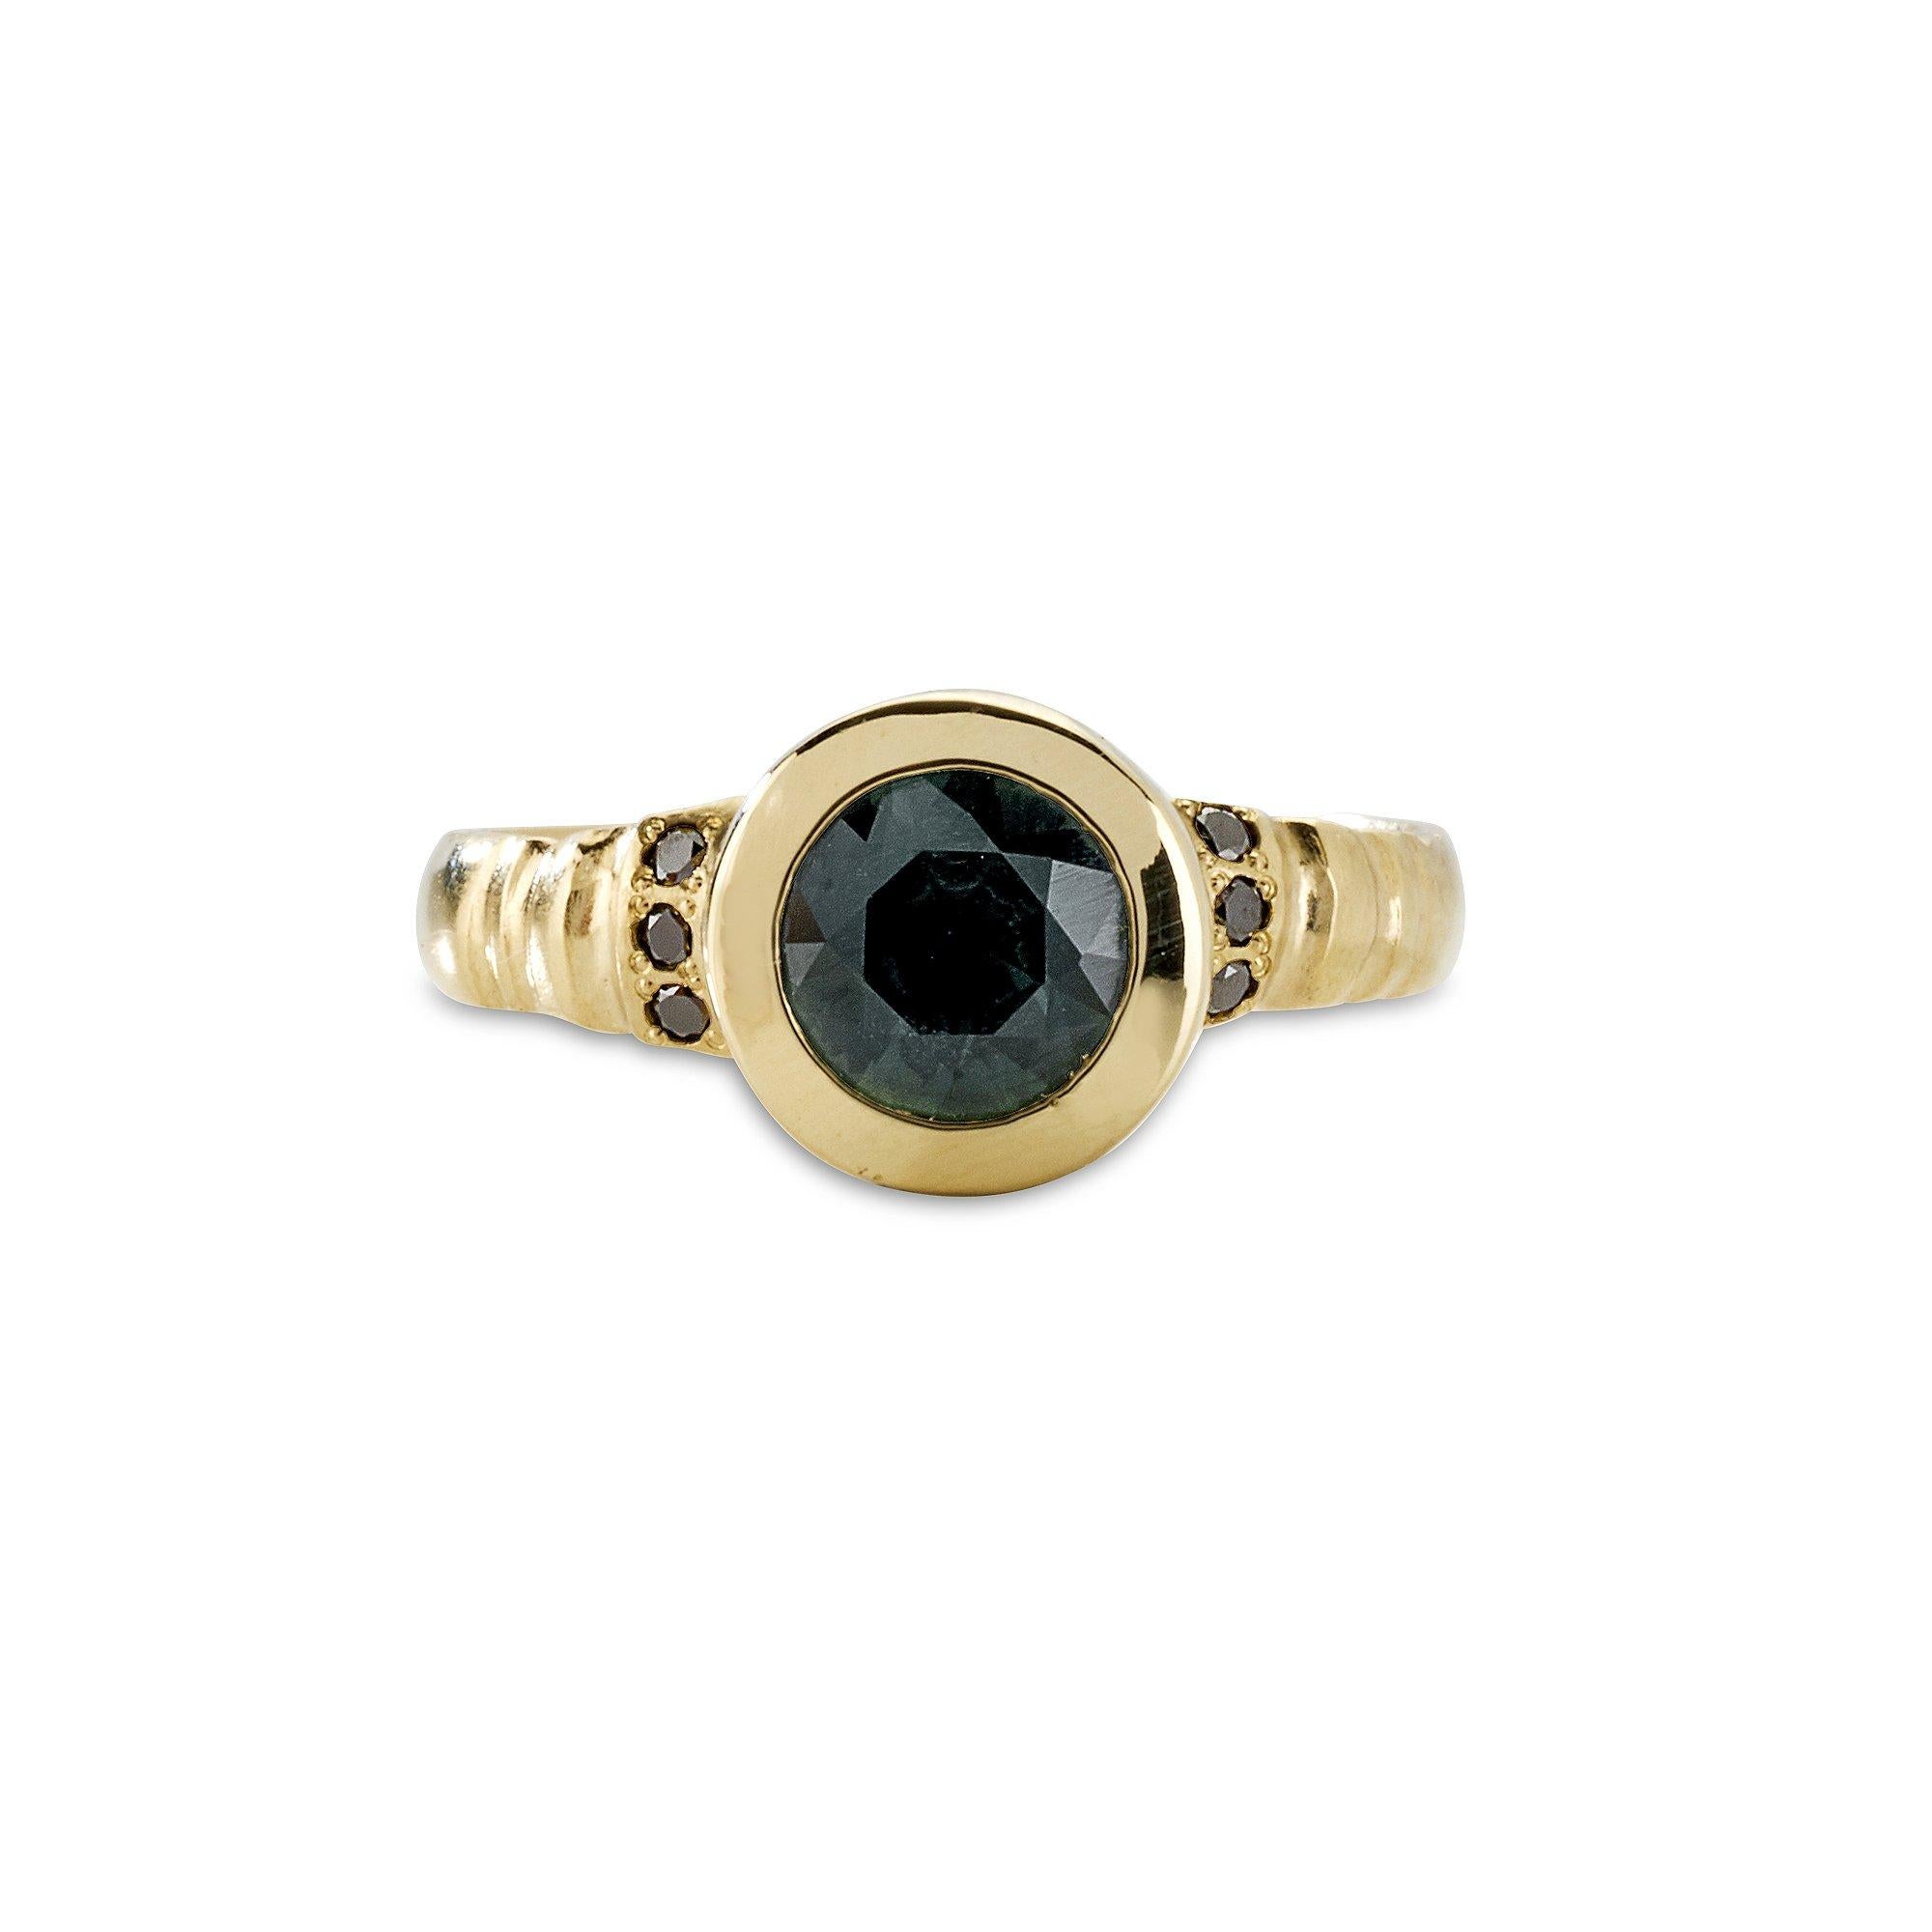 Assuan Ring, 18 Karat Yellow Gold with Australian Teal Sapphire and Black Diamond
Handcrafted and individually cast in solid gold. Olivia carves each piece from wax, making these items unique, which we believe is what gives them their beauty. The